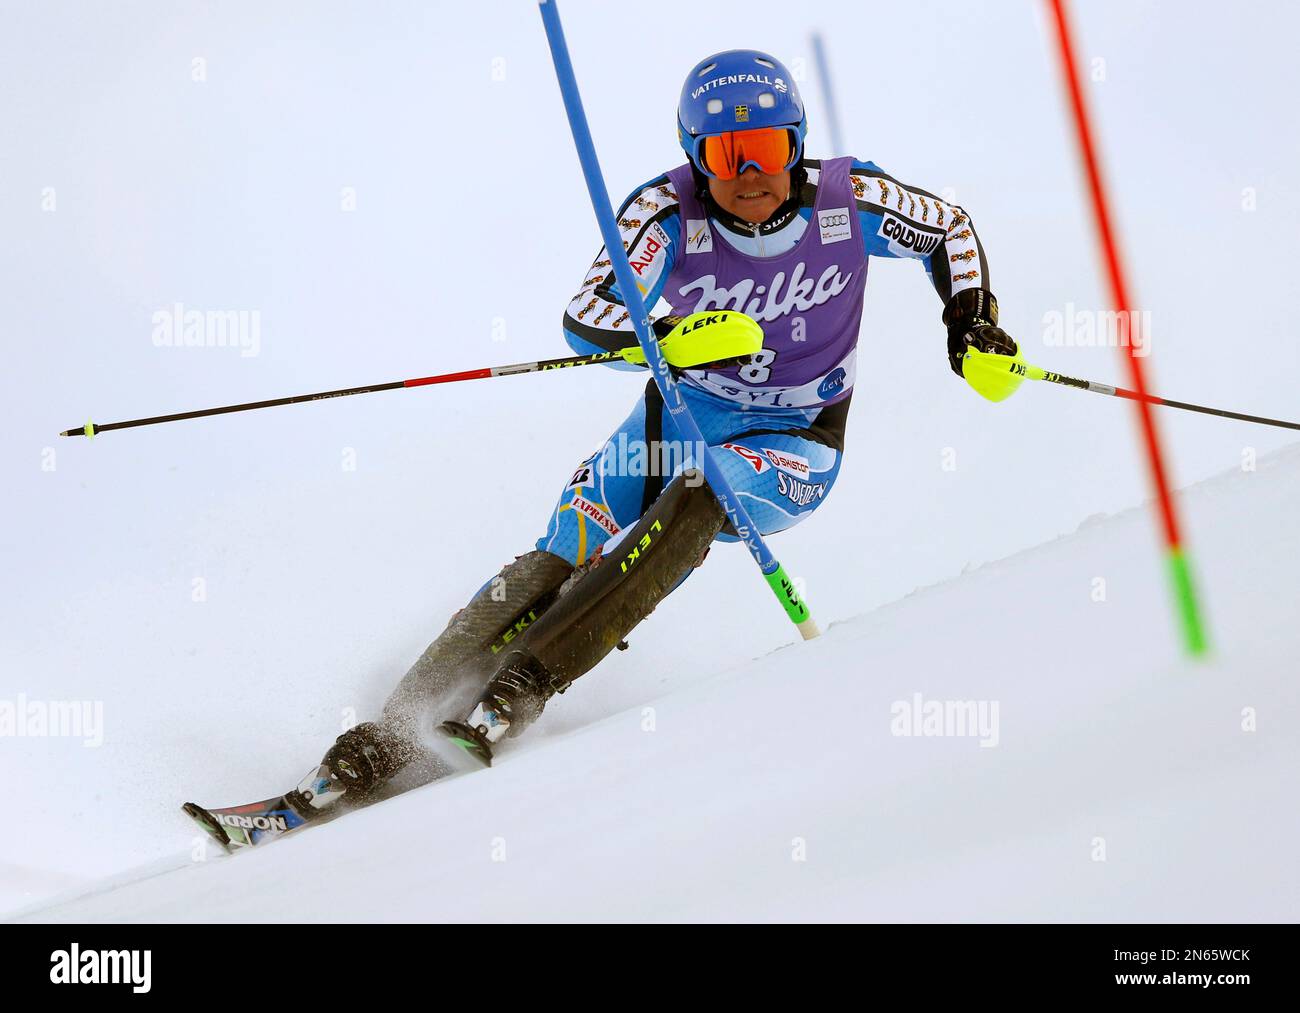 Mattias Hargin, of Sweden, competes during the first run of an alpine ski,  men's World Cup slalom race, at the World Cup finals in Meribel, France,  Sunday, March 22, 2015. (AP Photo/Shinichiro